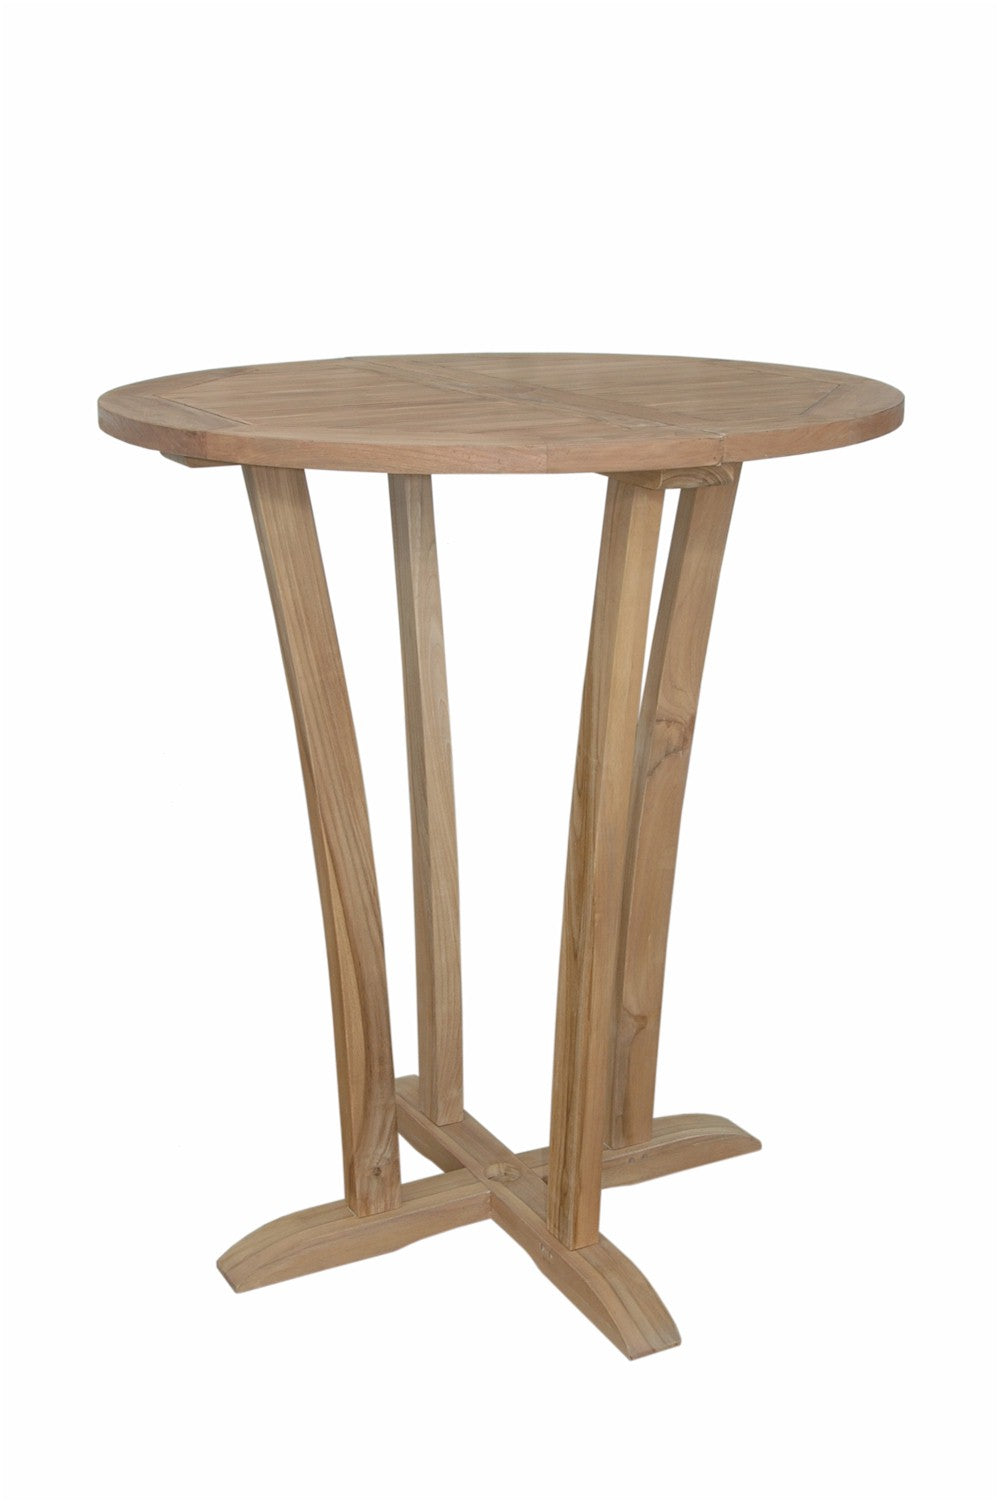 Descanso 35" Round Bar Tables